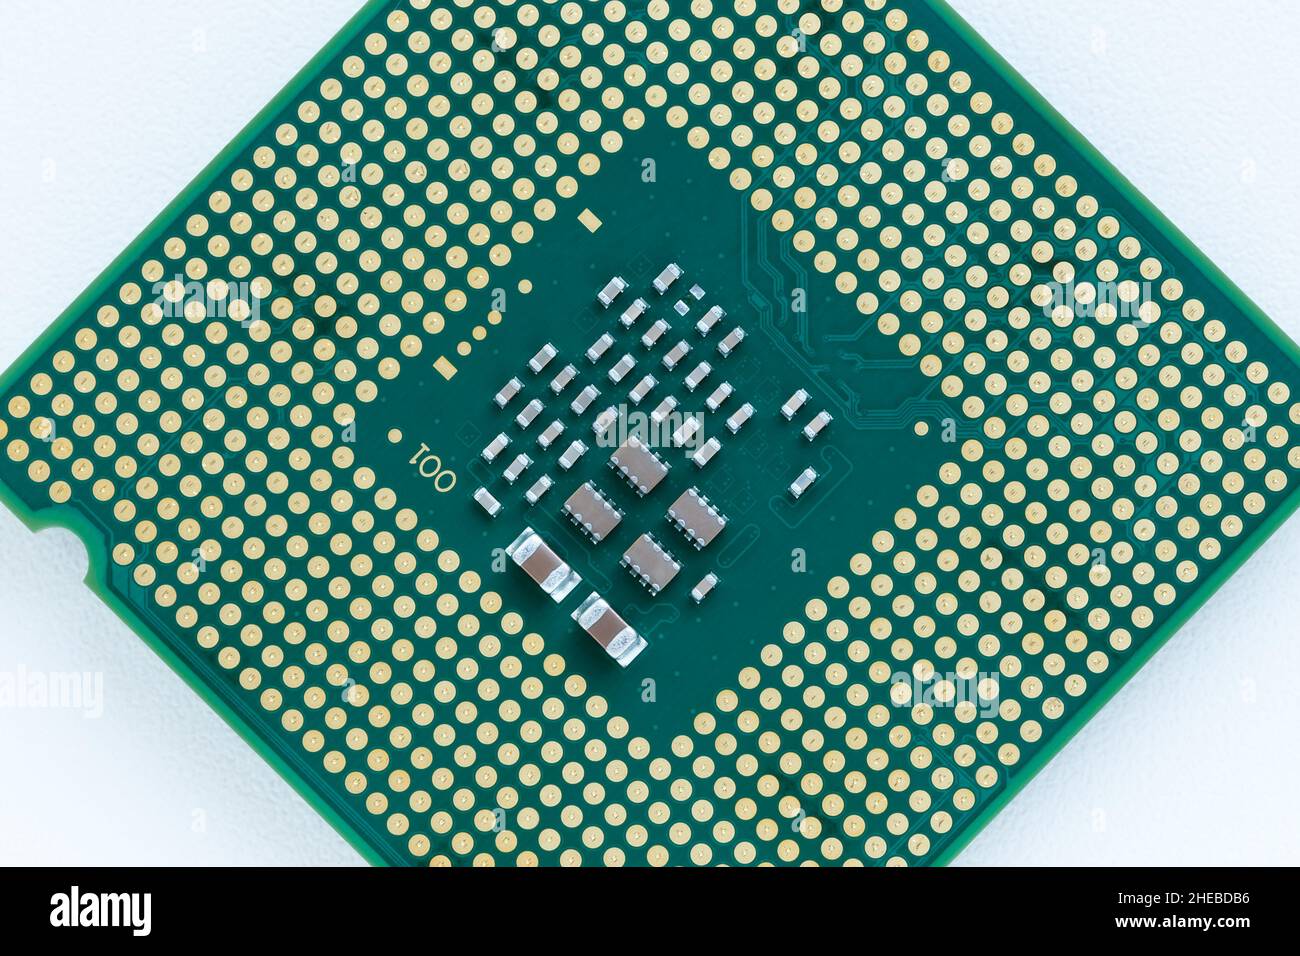 The reverse side of the processor with smd components. Macro photography Stock Photo